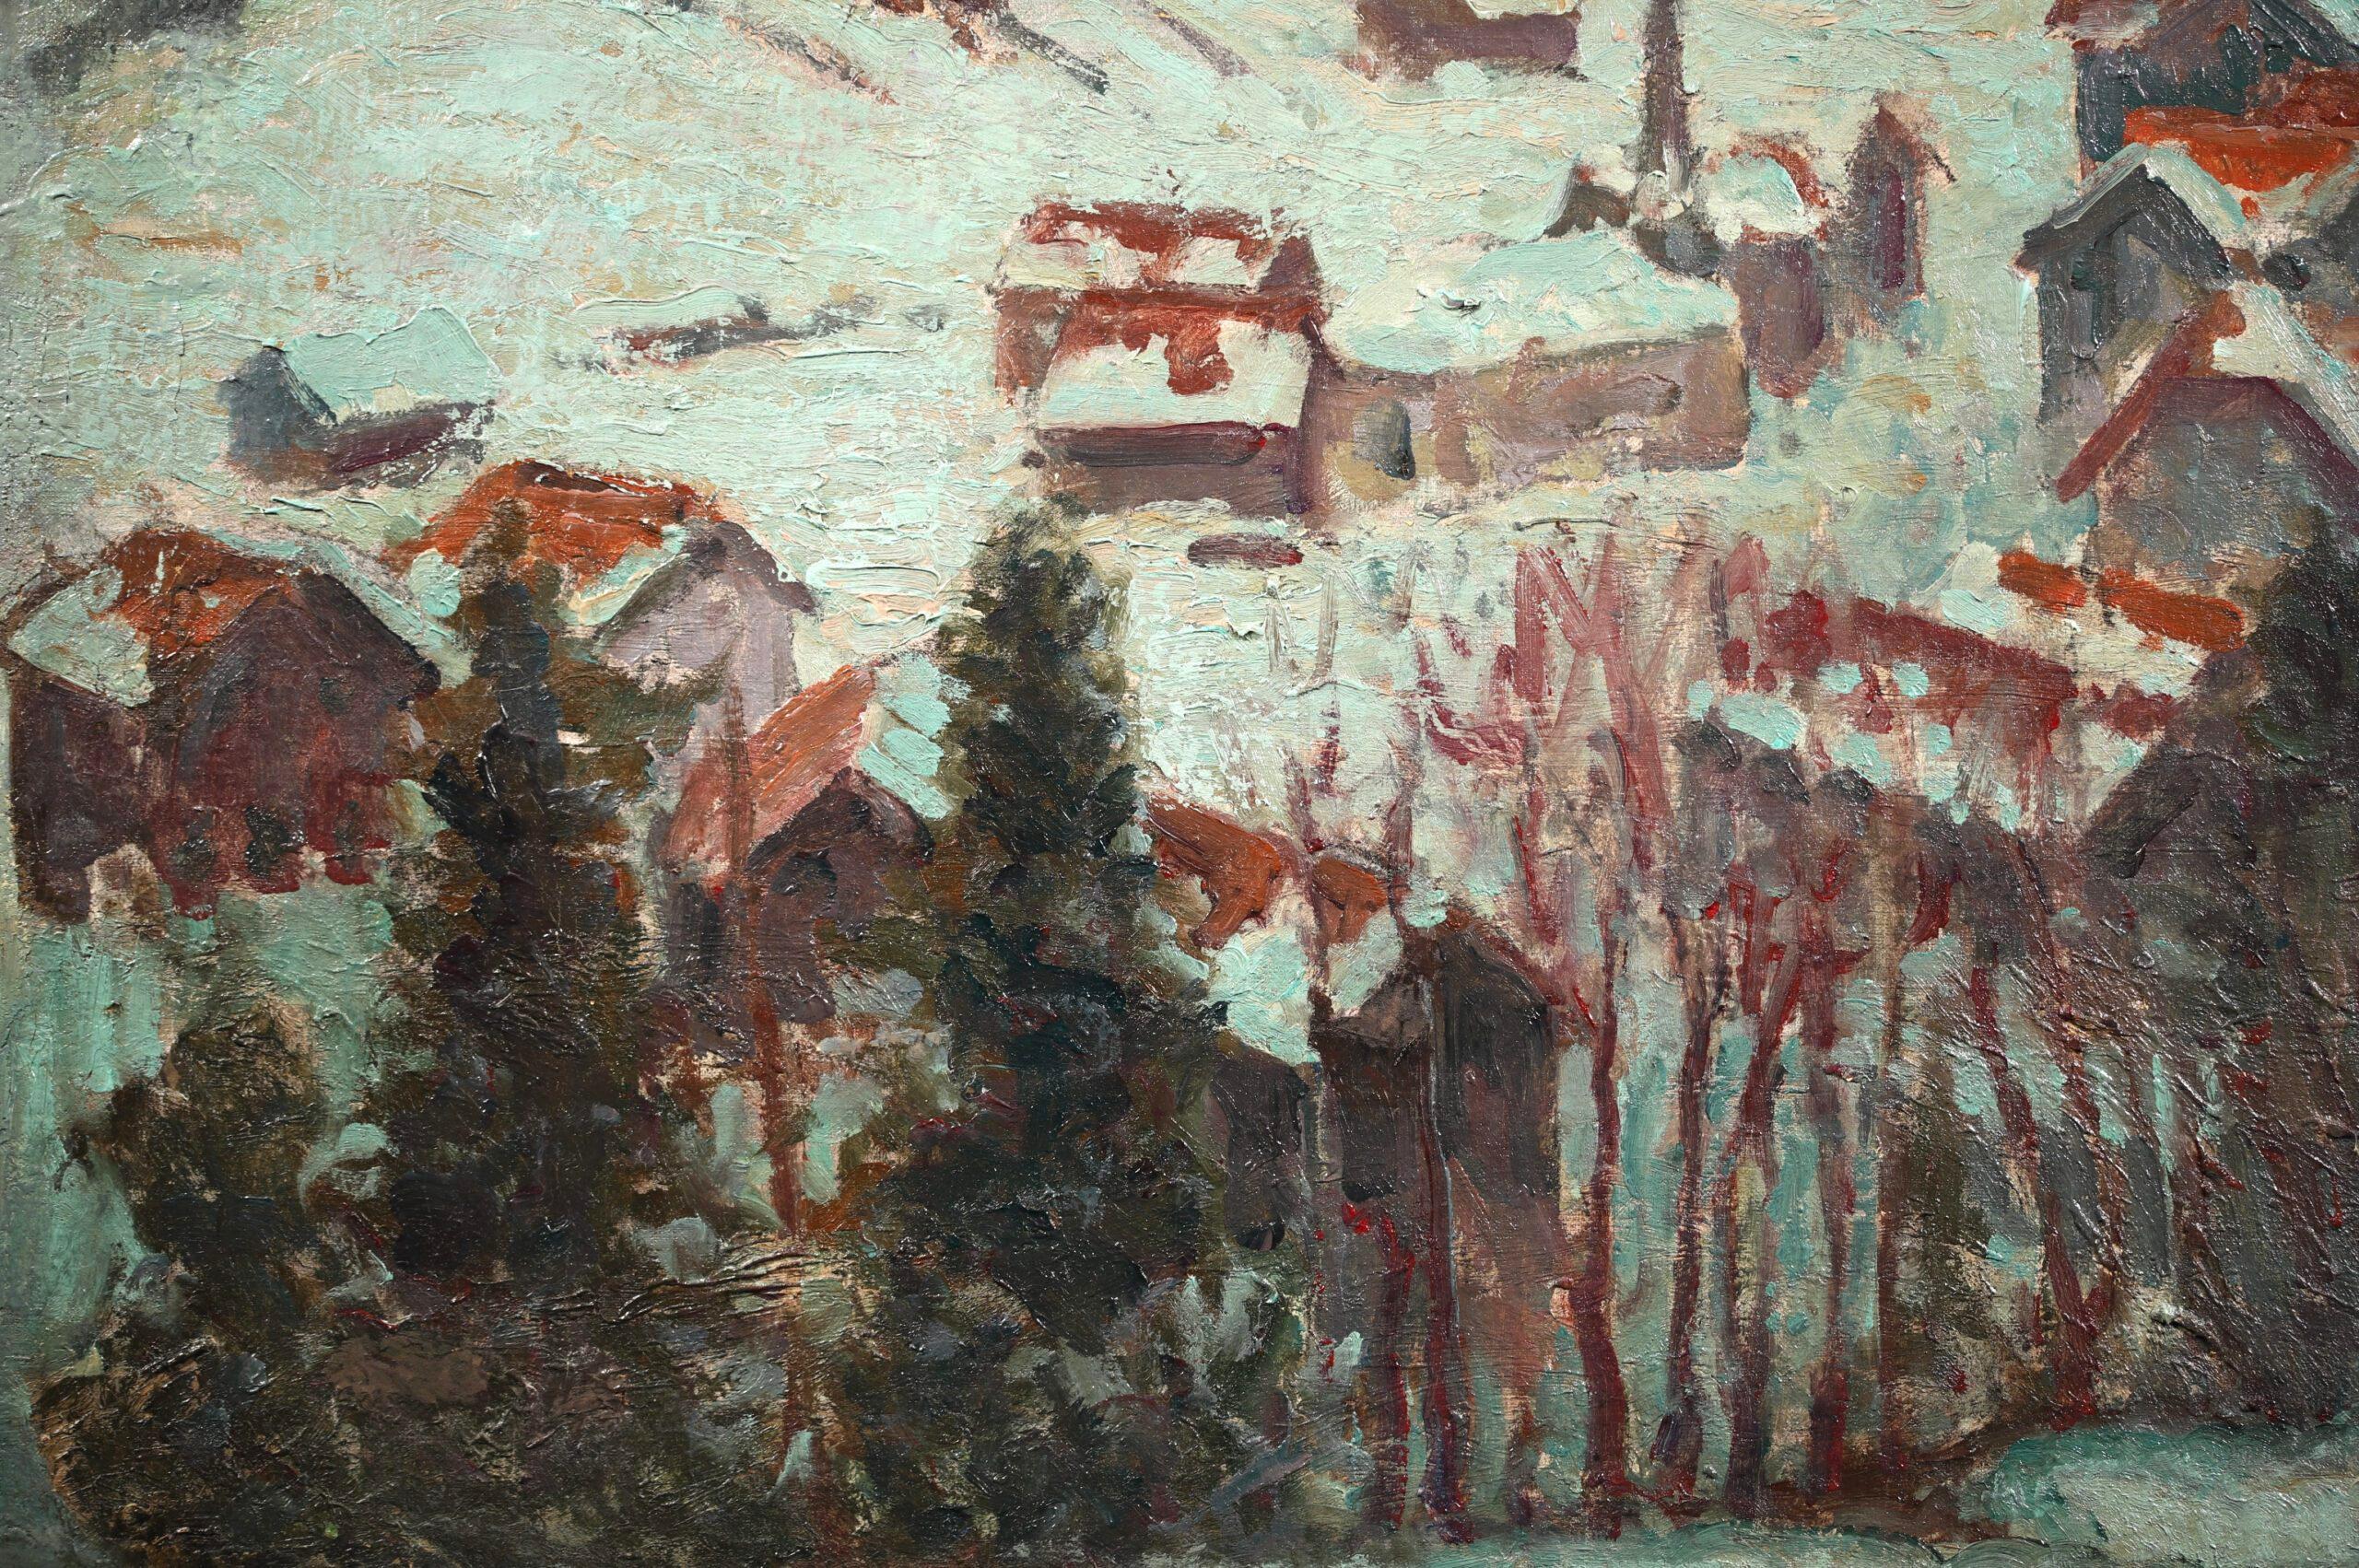 Winter Snow - Gstaad - Impressionist Landscape Oil by William Samuel Horton For Sale 8